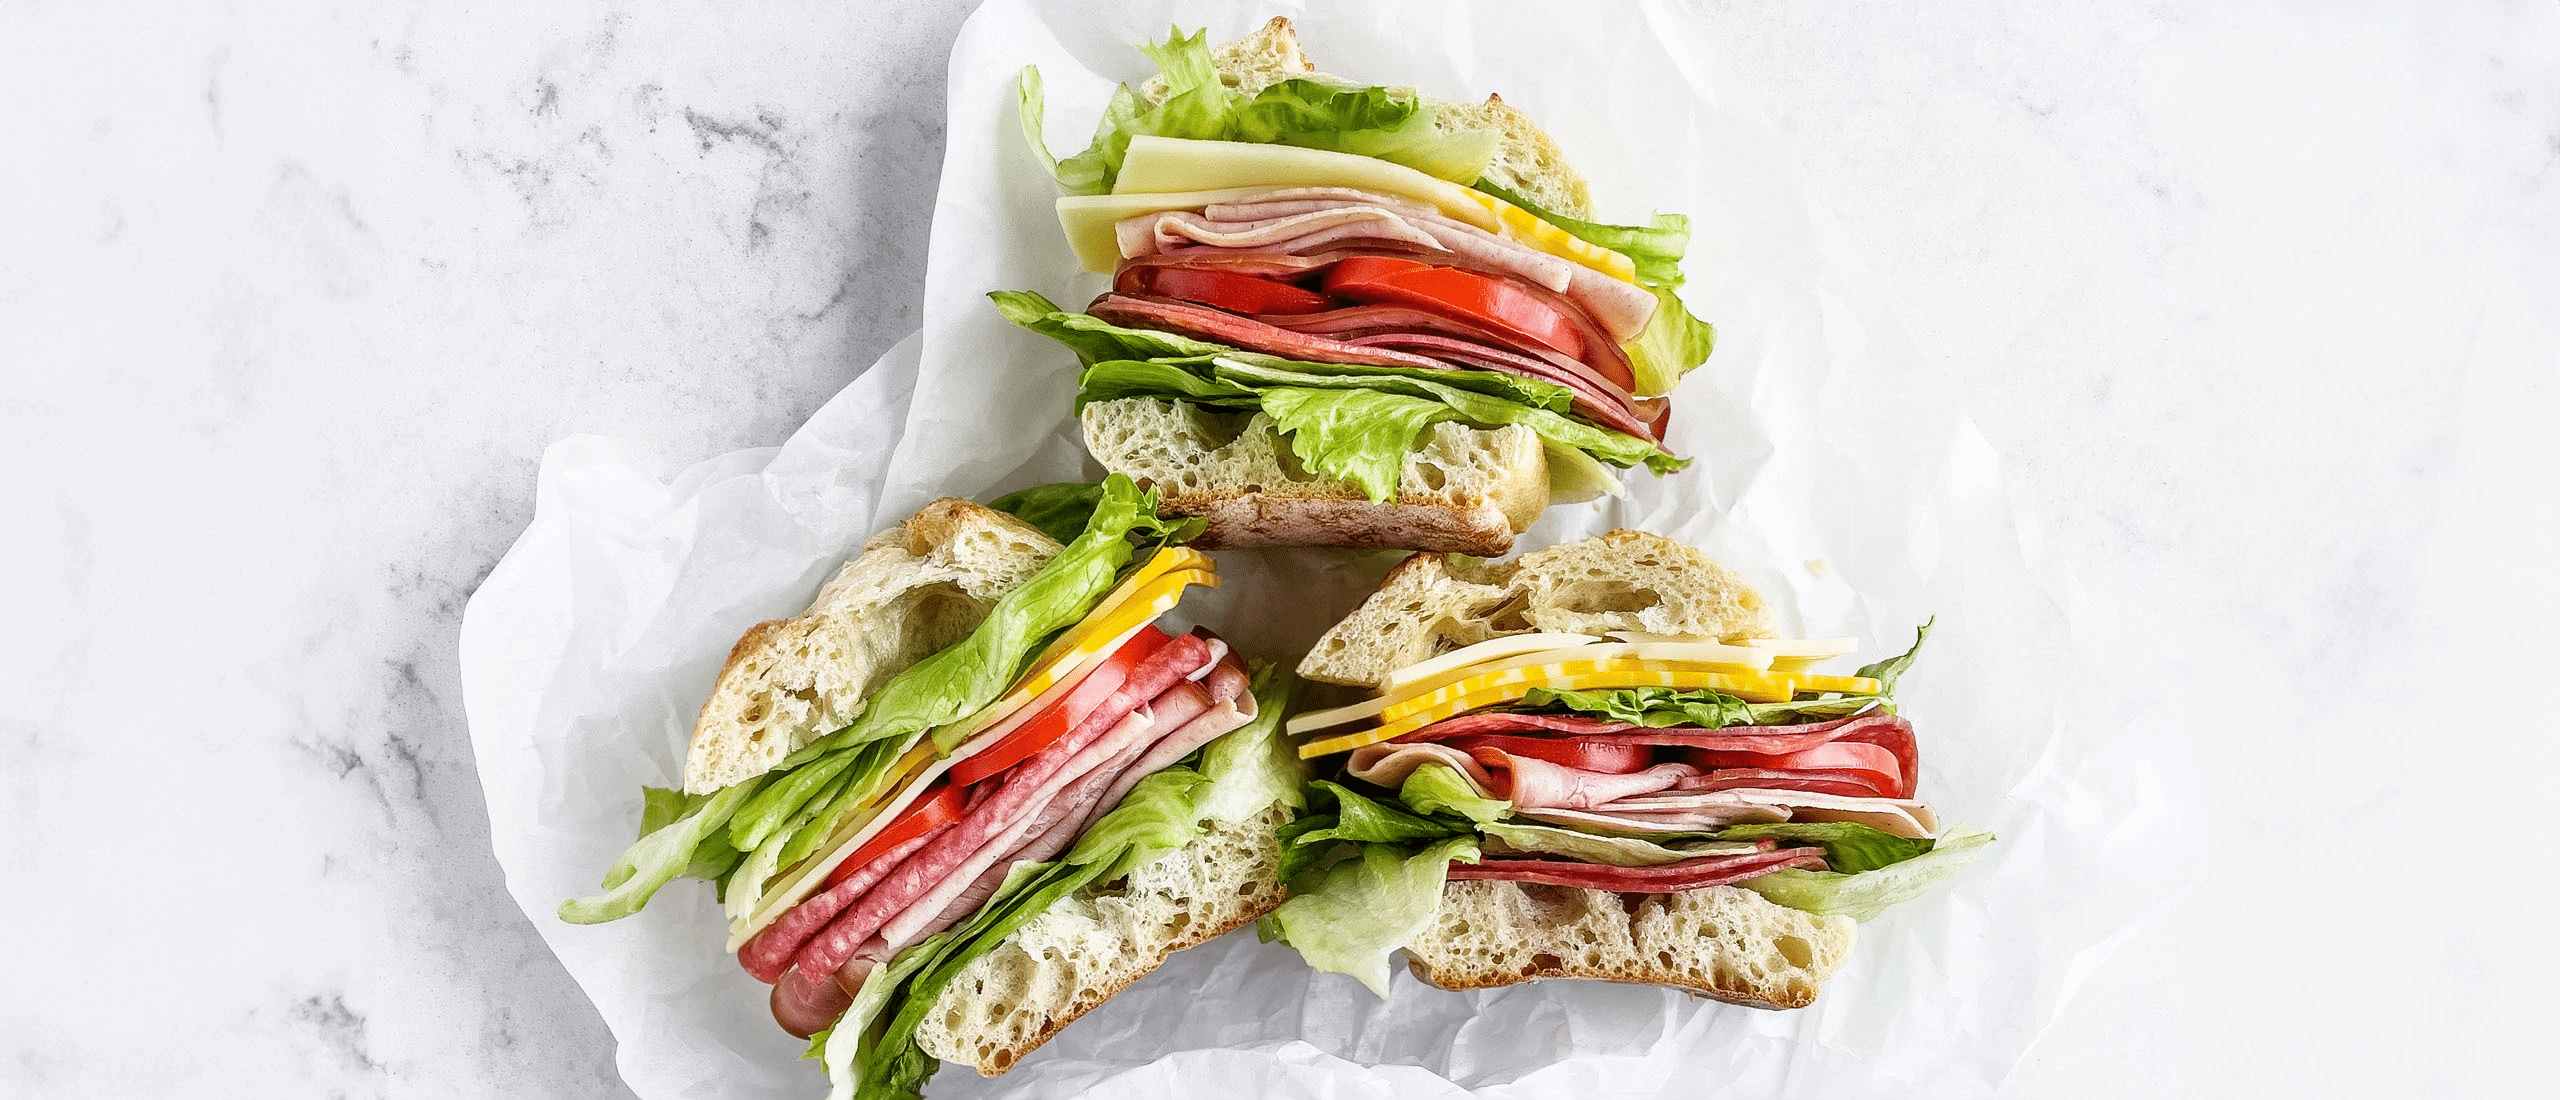 Three sandwiches loaded up with the works: deli meat, veggies, and cheese in wrappers on a white marble background